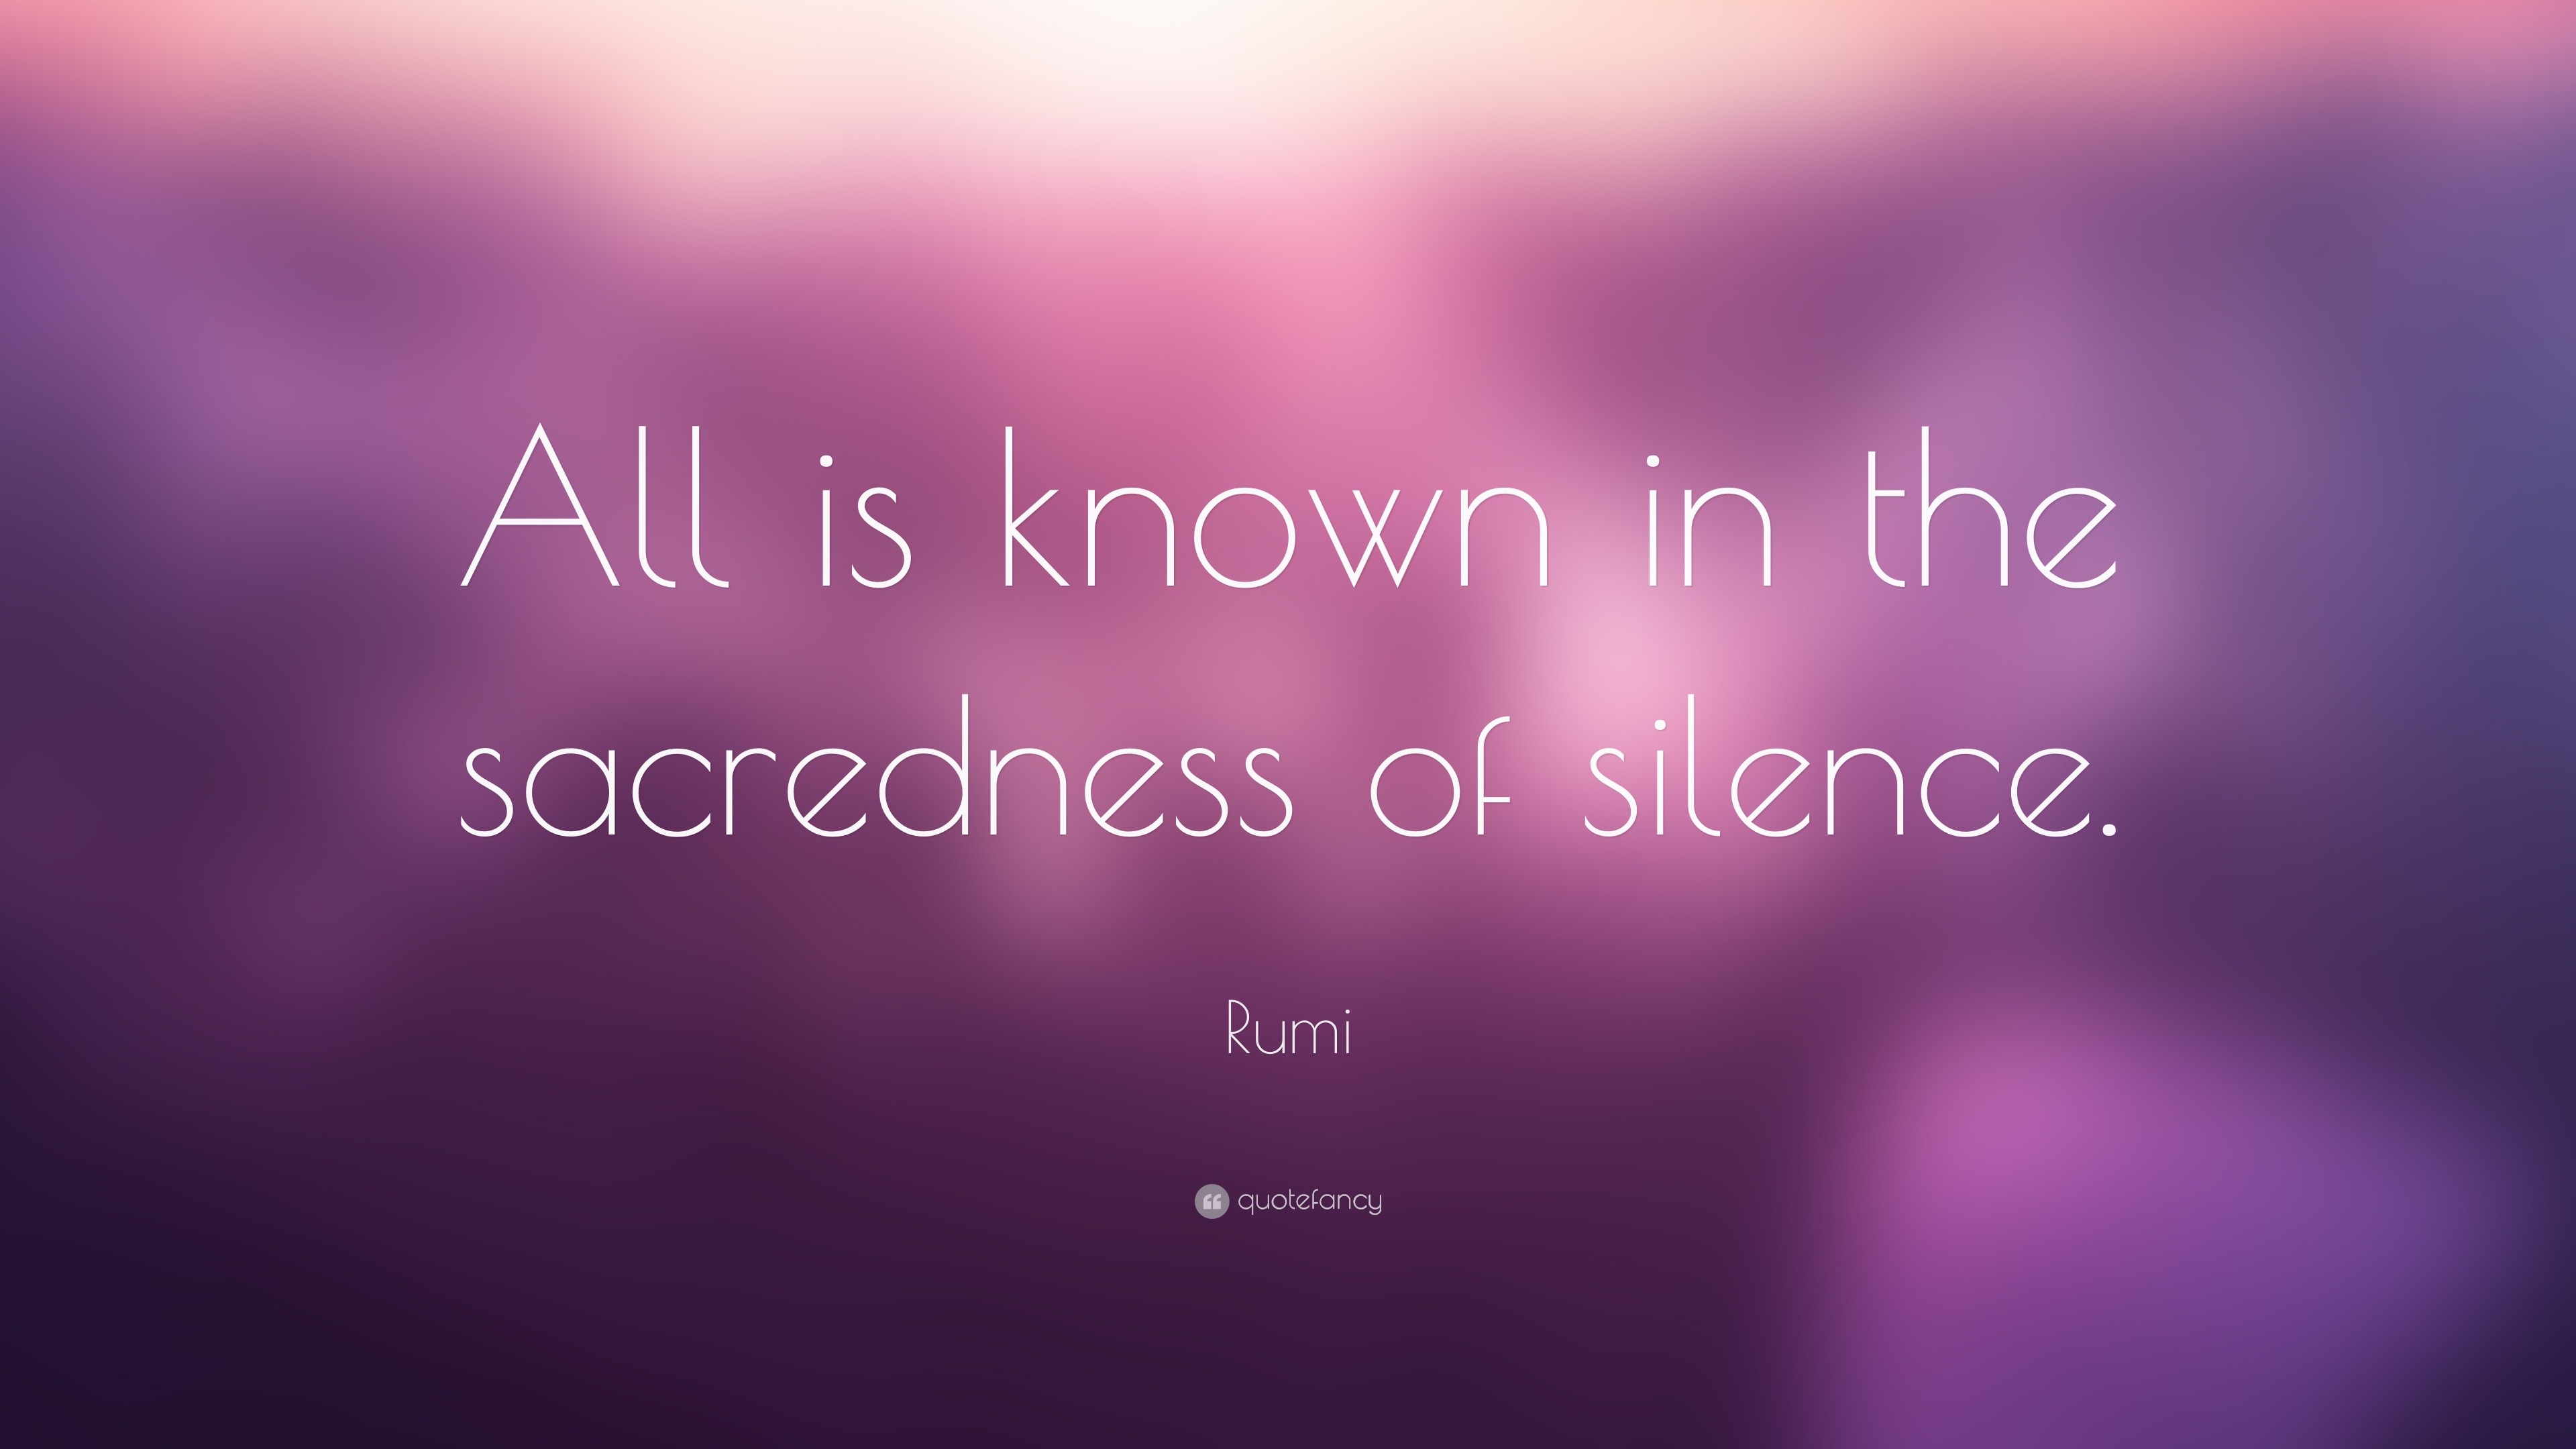 Rumi Quote: “All is known in the sacredness of silence.”